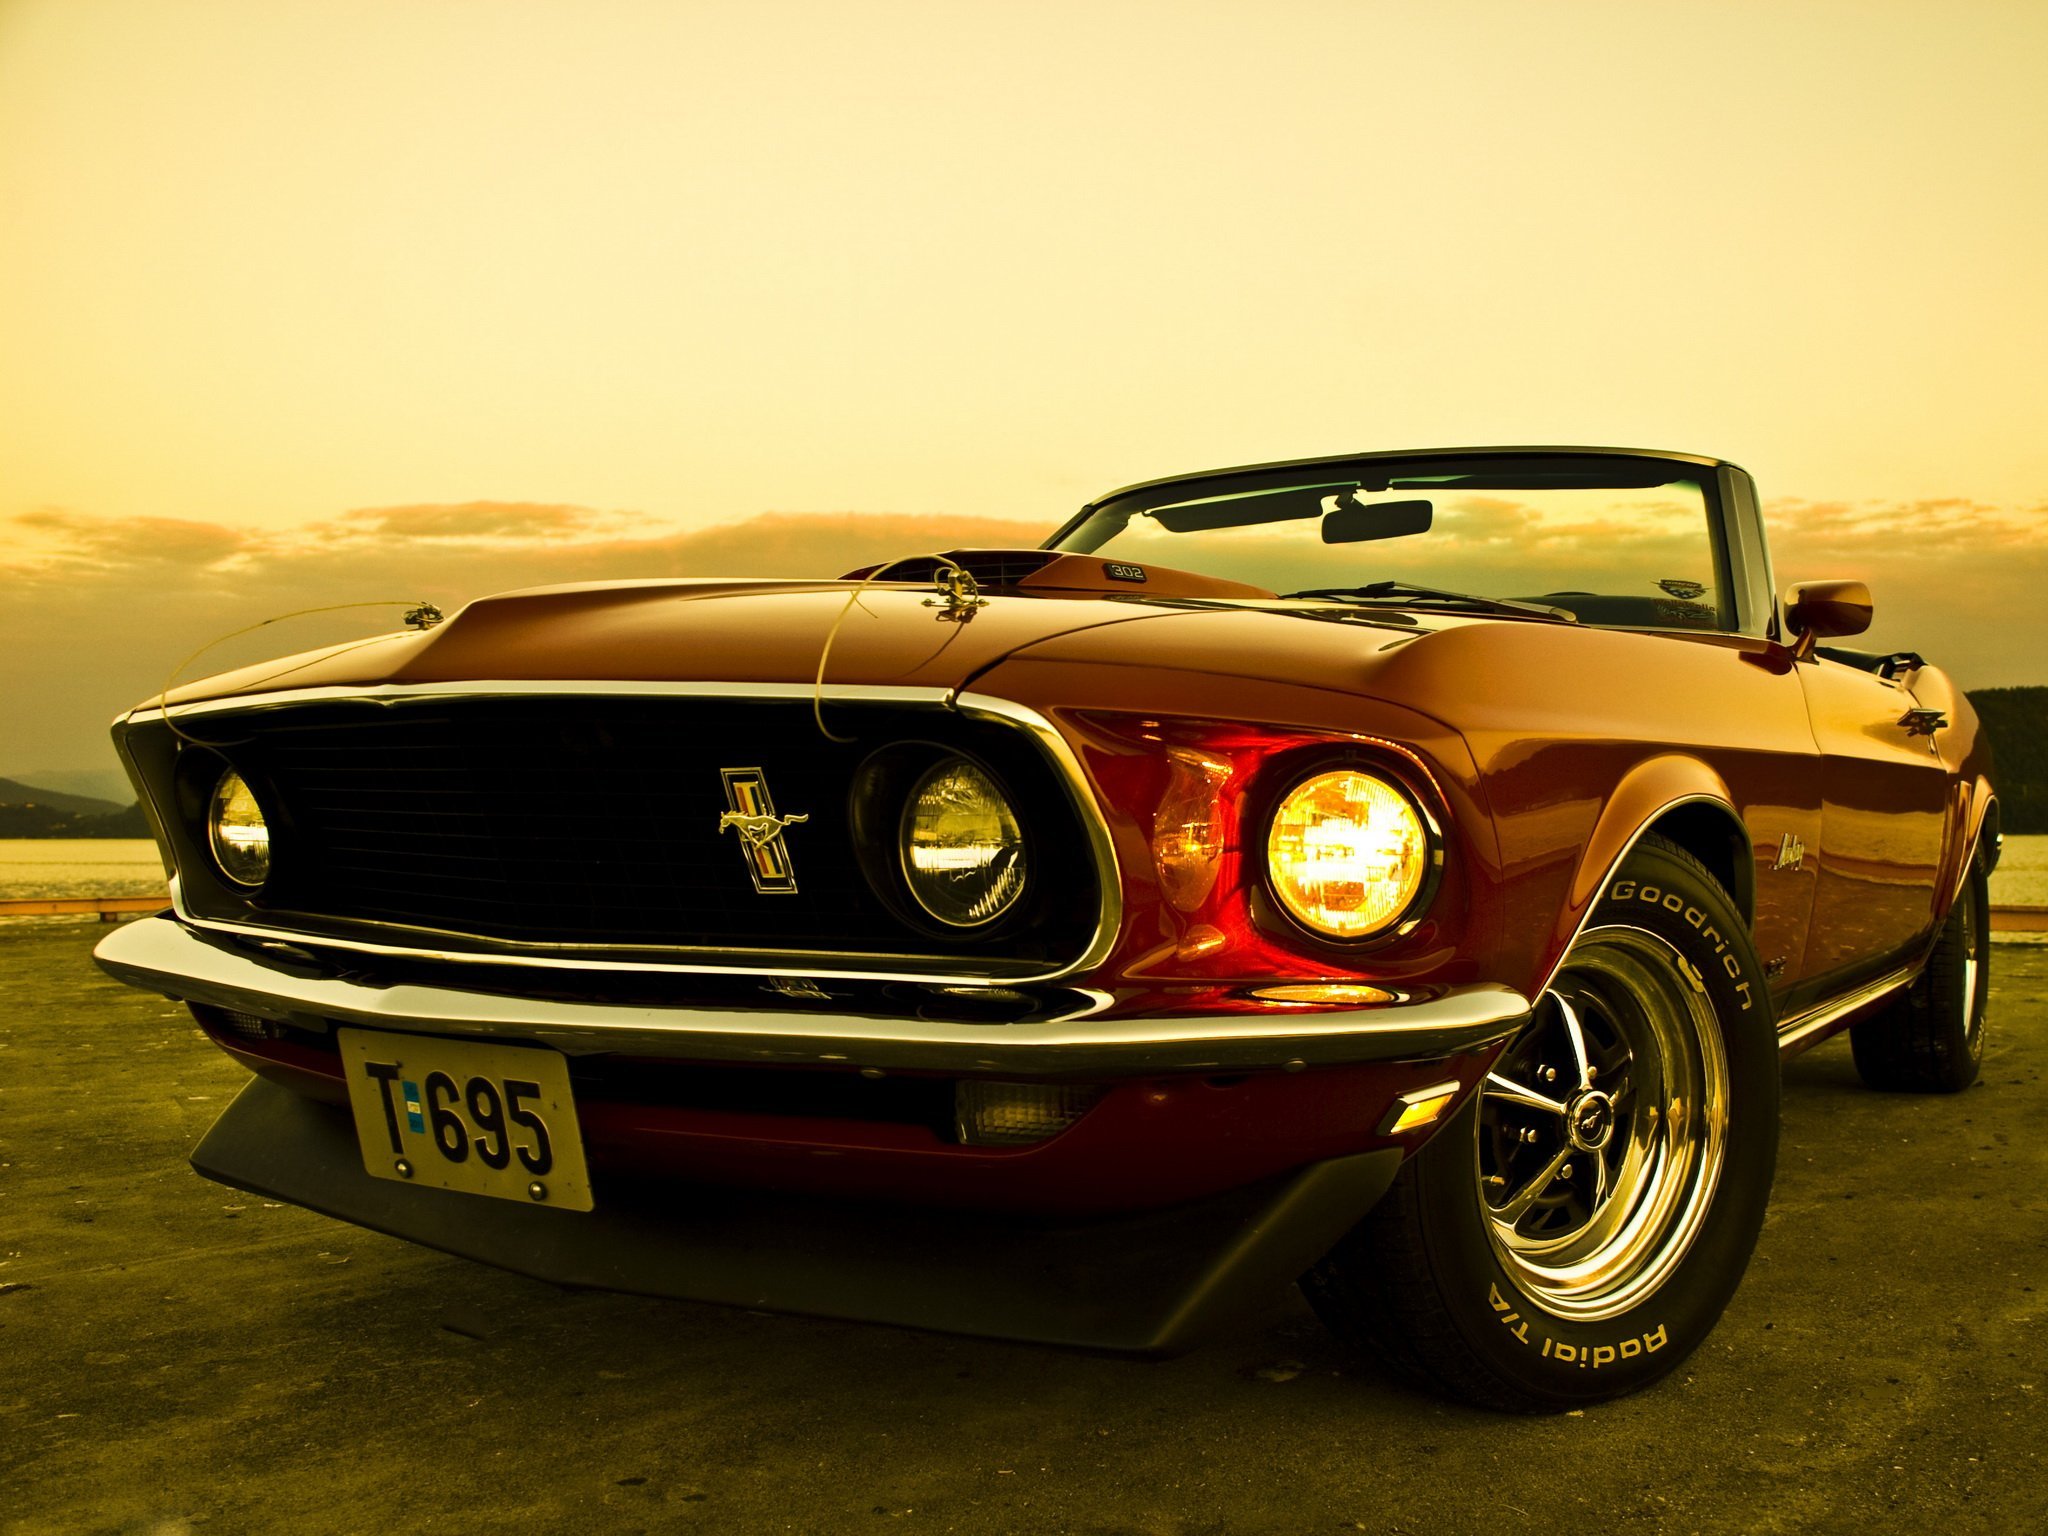 35+ Wallpaper Of 1965 Ford Mustang Convertible free download